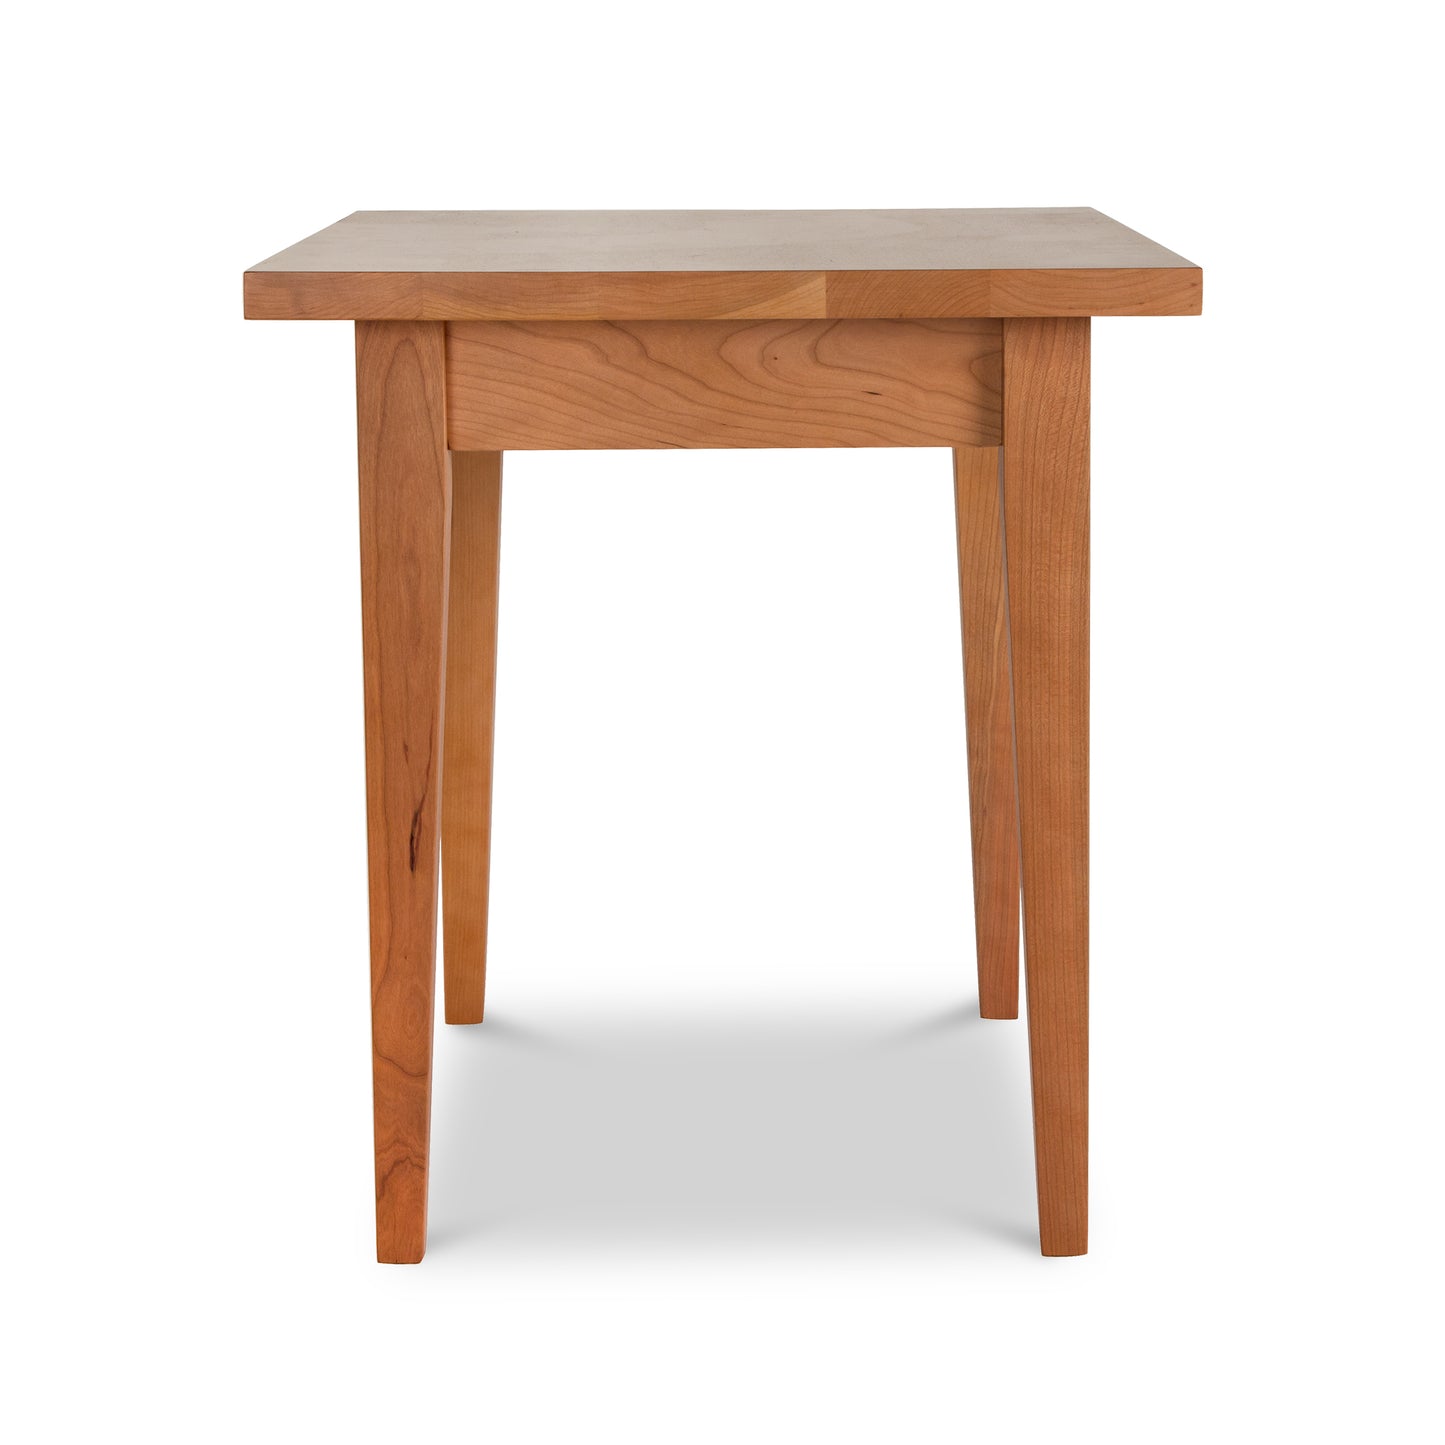 A Classic Shaker End Table from Lyndon Furniture, with a square top, is perfect for adding a touch of luxury and functionality to any space.